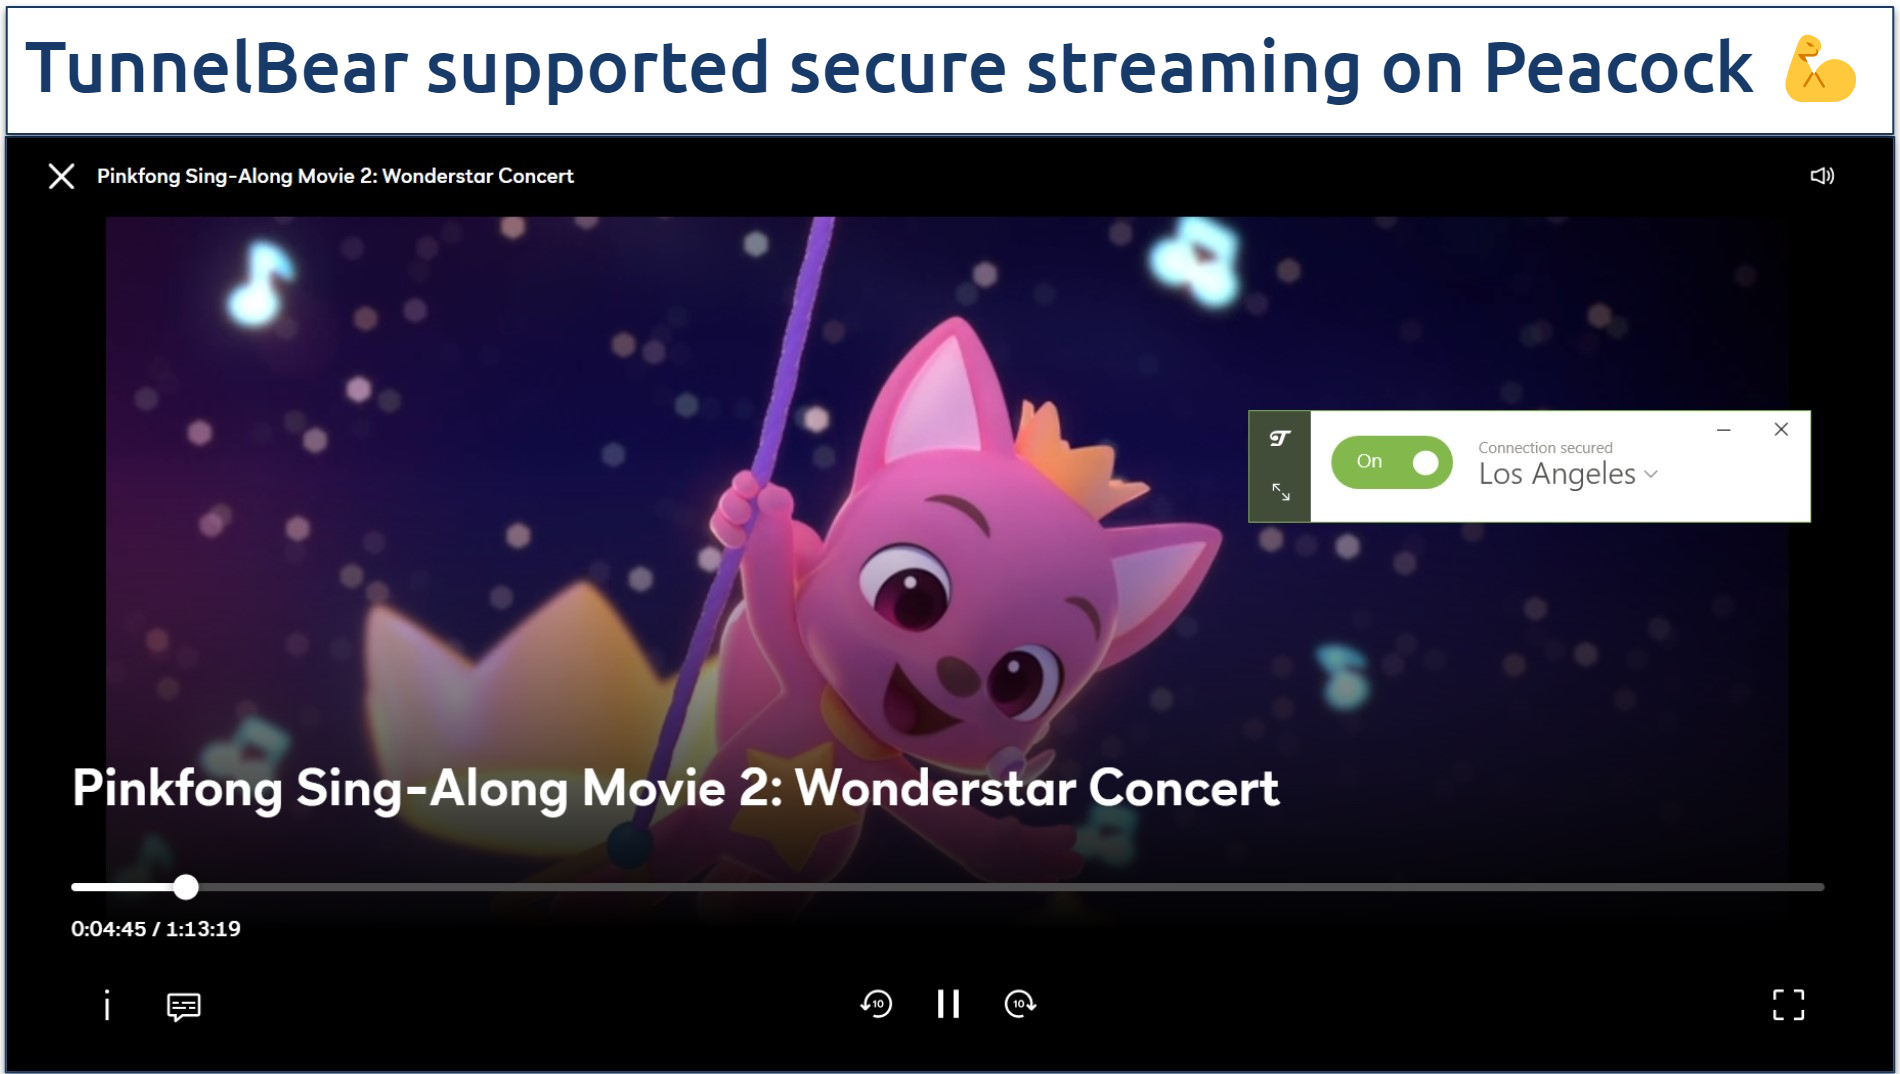 A screenshot of Peacock streaming Pinkfong Sing-Along Movie 2: Wonderstart Concert while connected to TunnelBear's US server